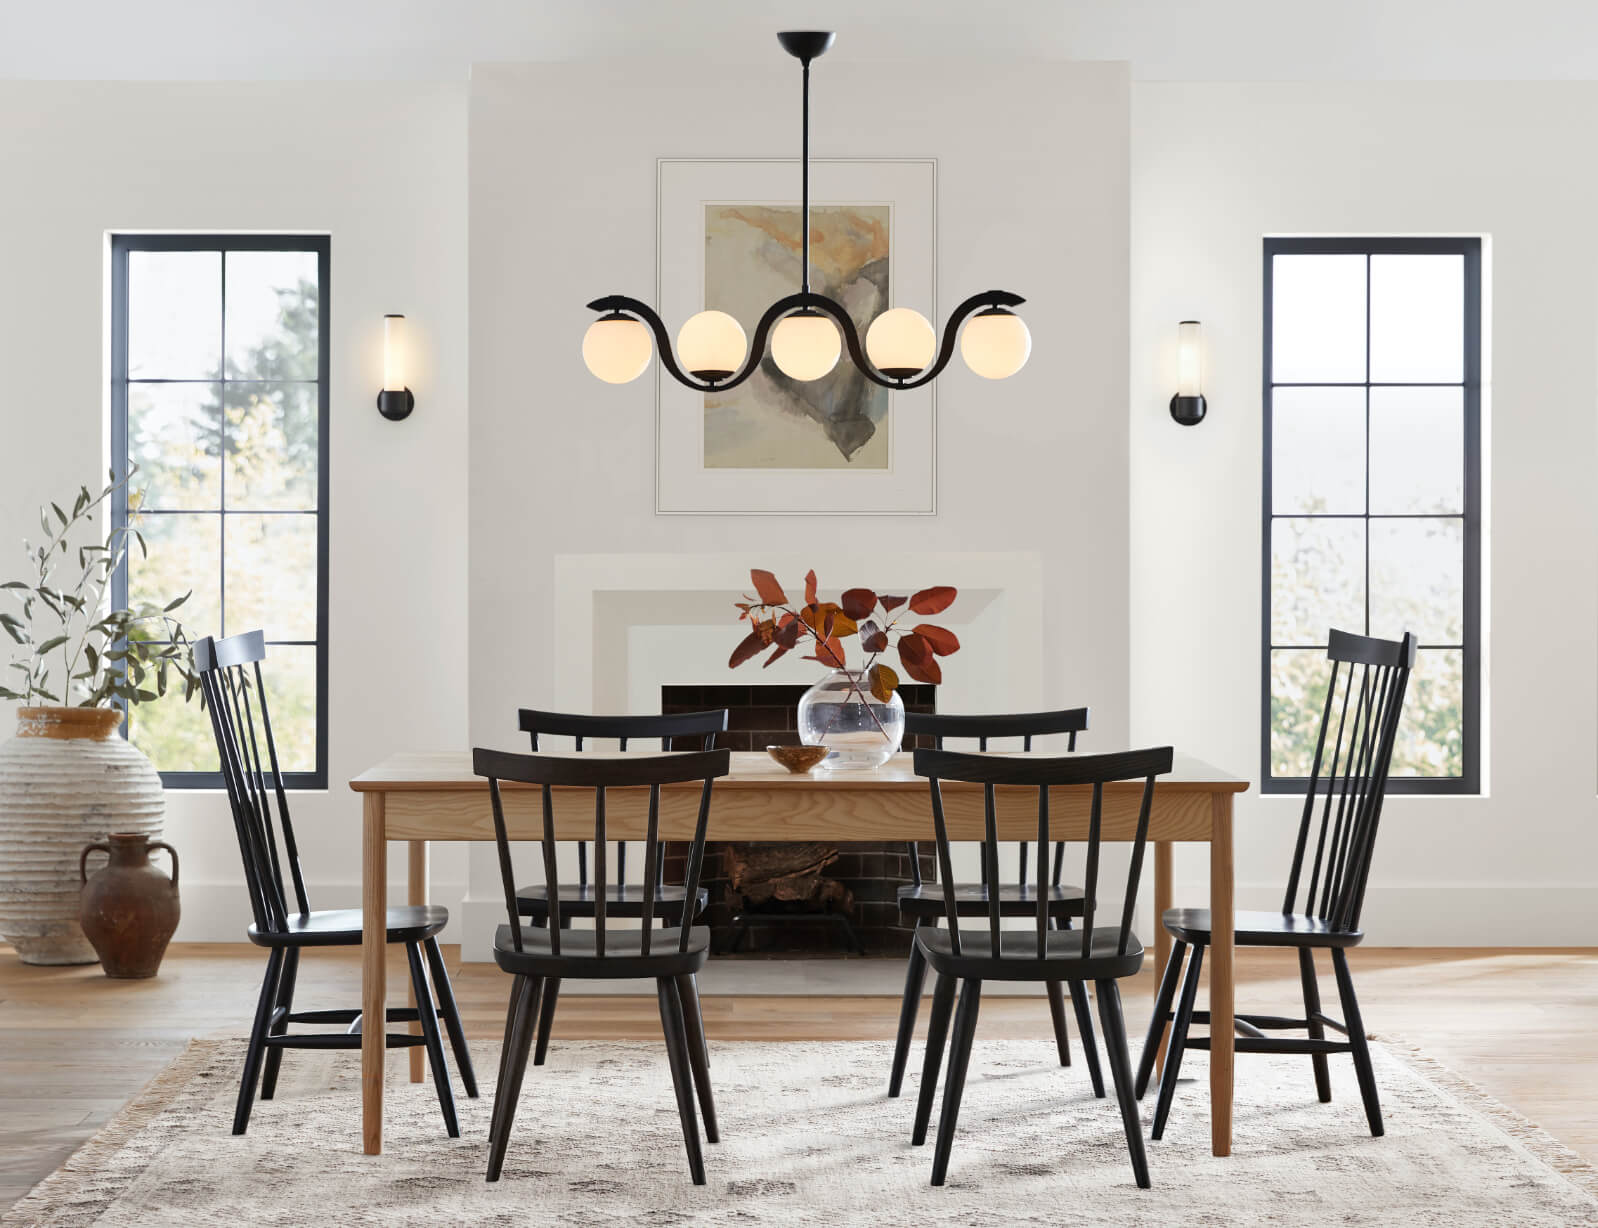 How To Choose Dining Room Lighting, How High Should A Light Be Above Dining Table